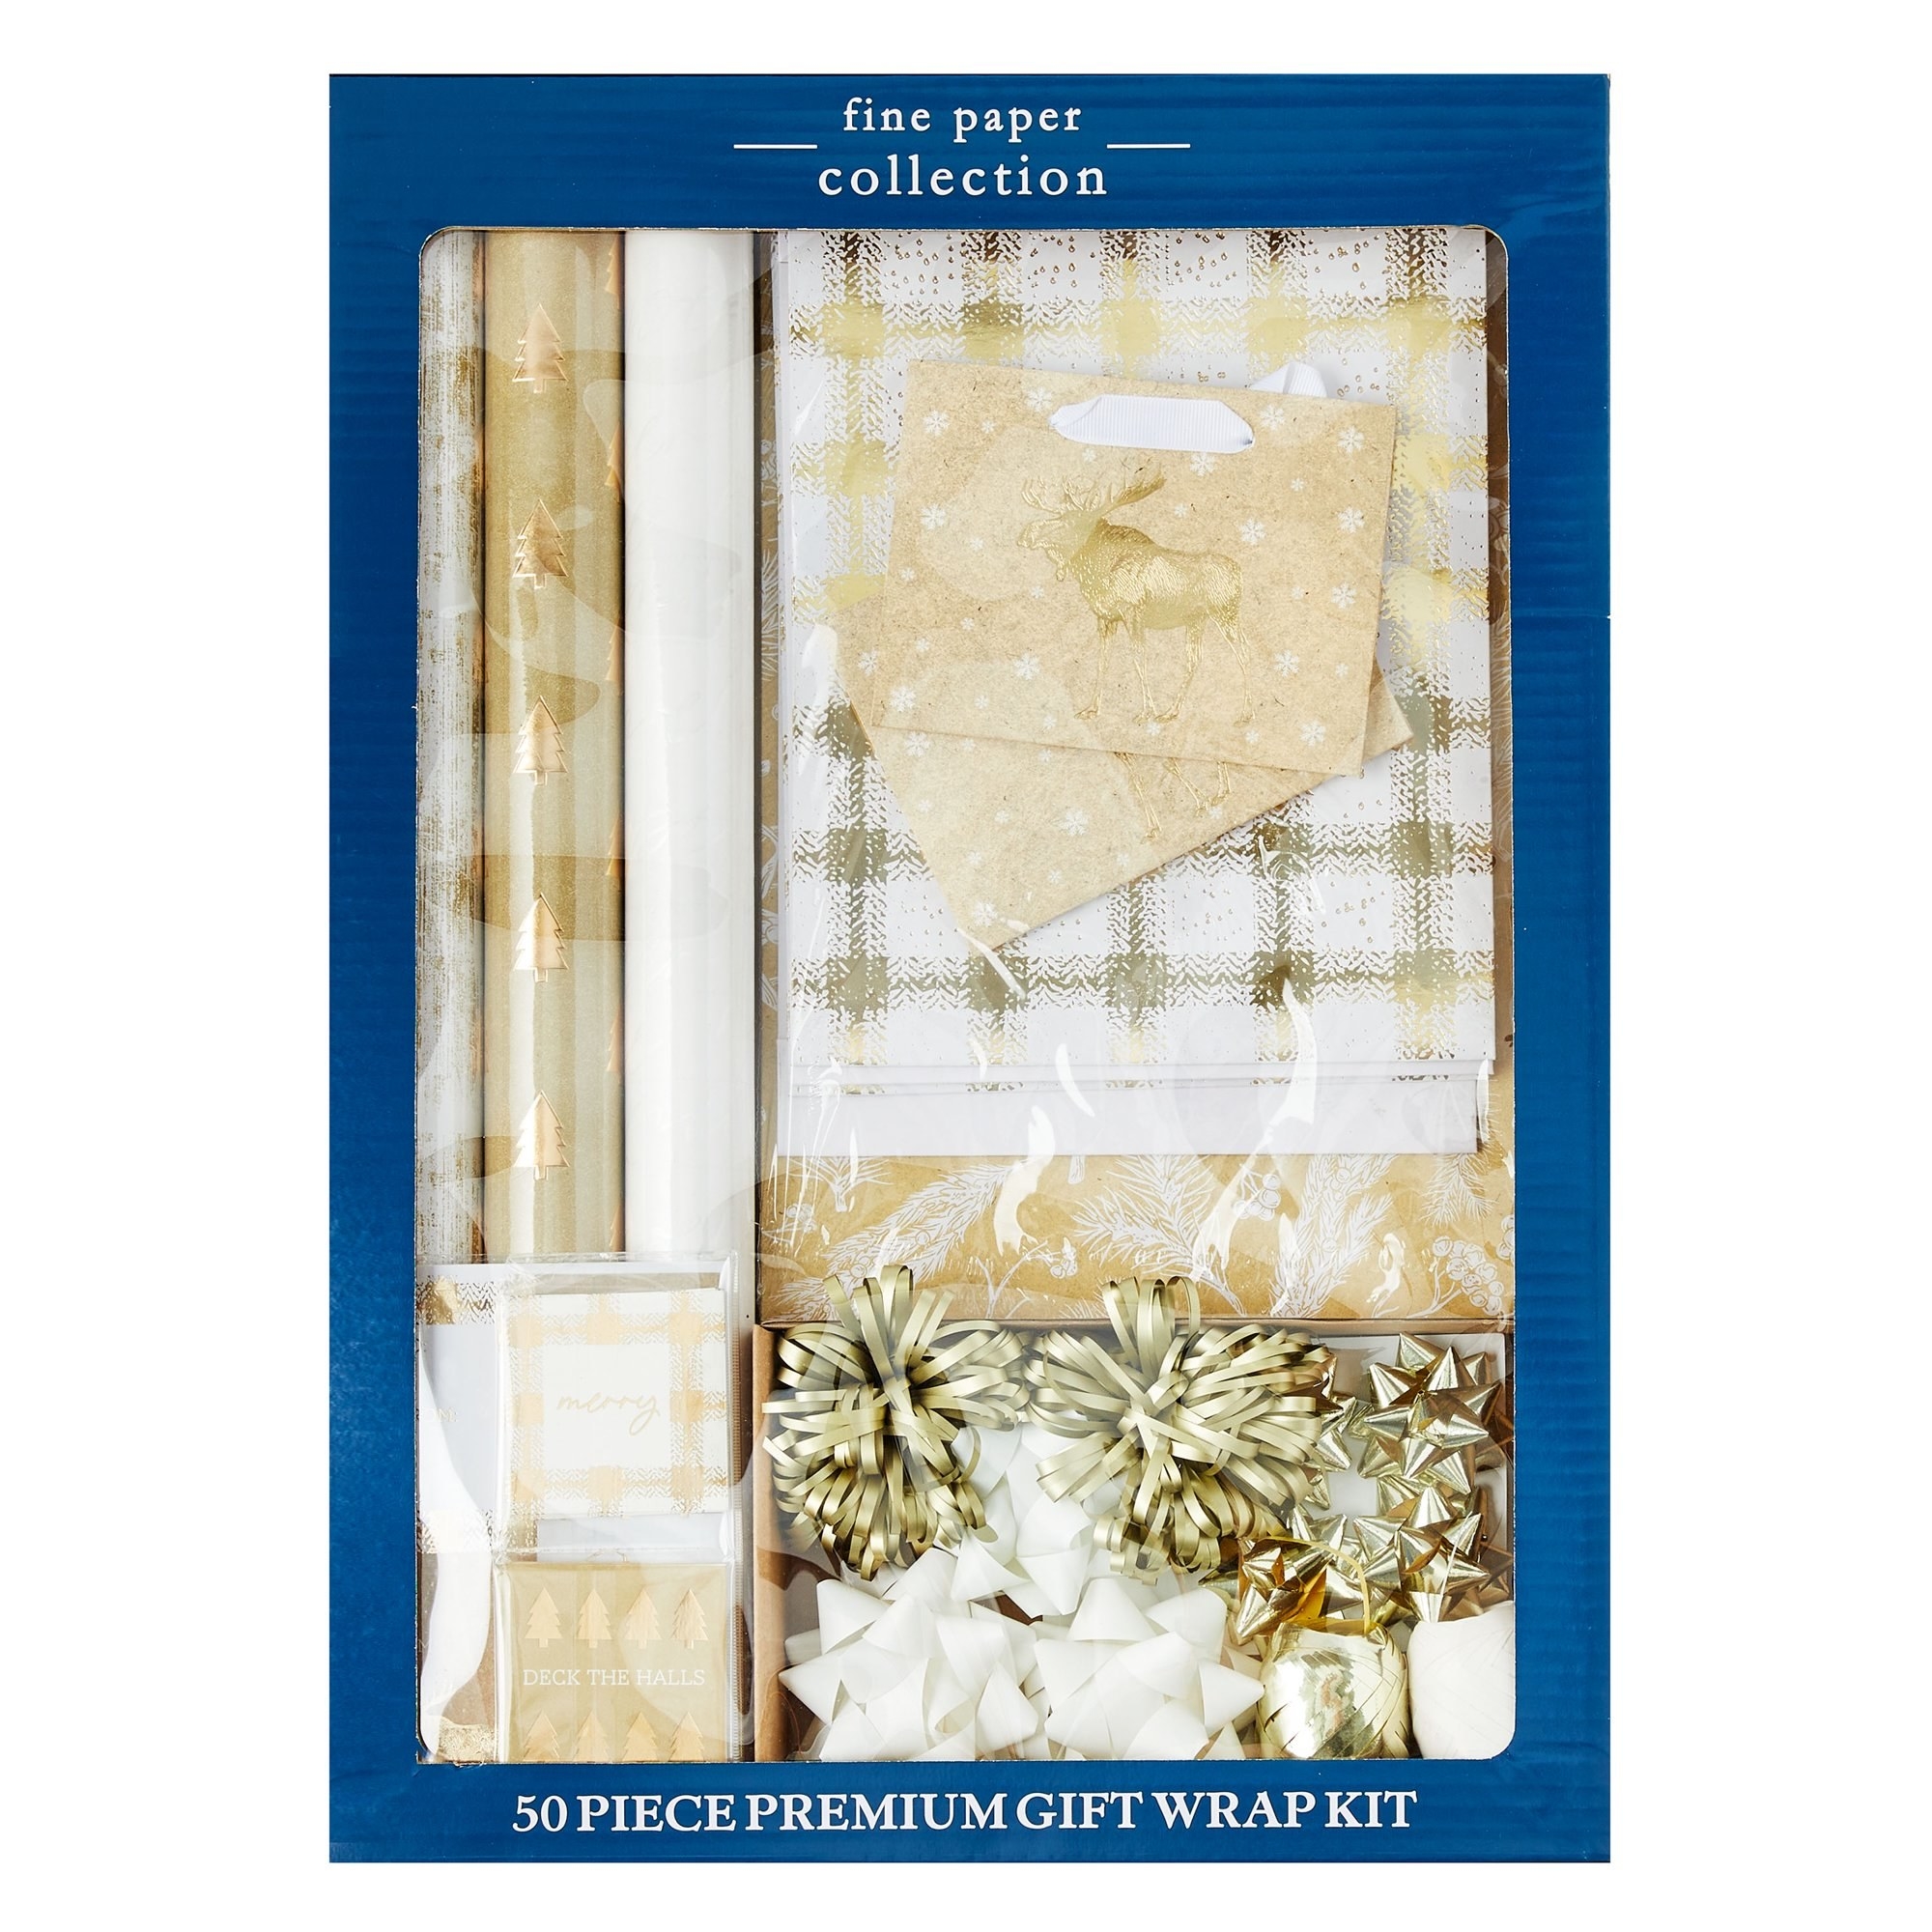 A gift wrap kit containing gold and white gift wrap paper and bows